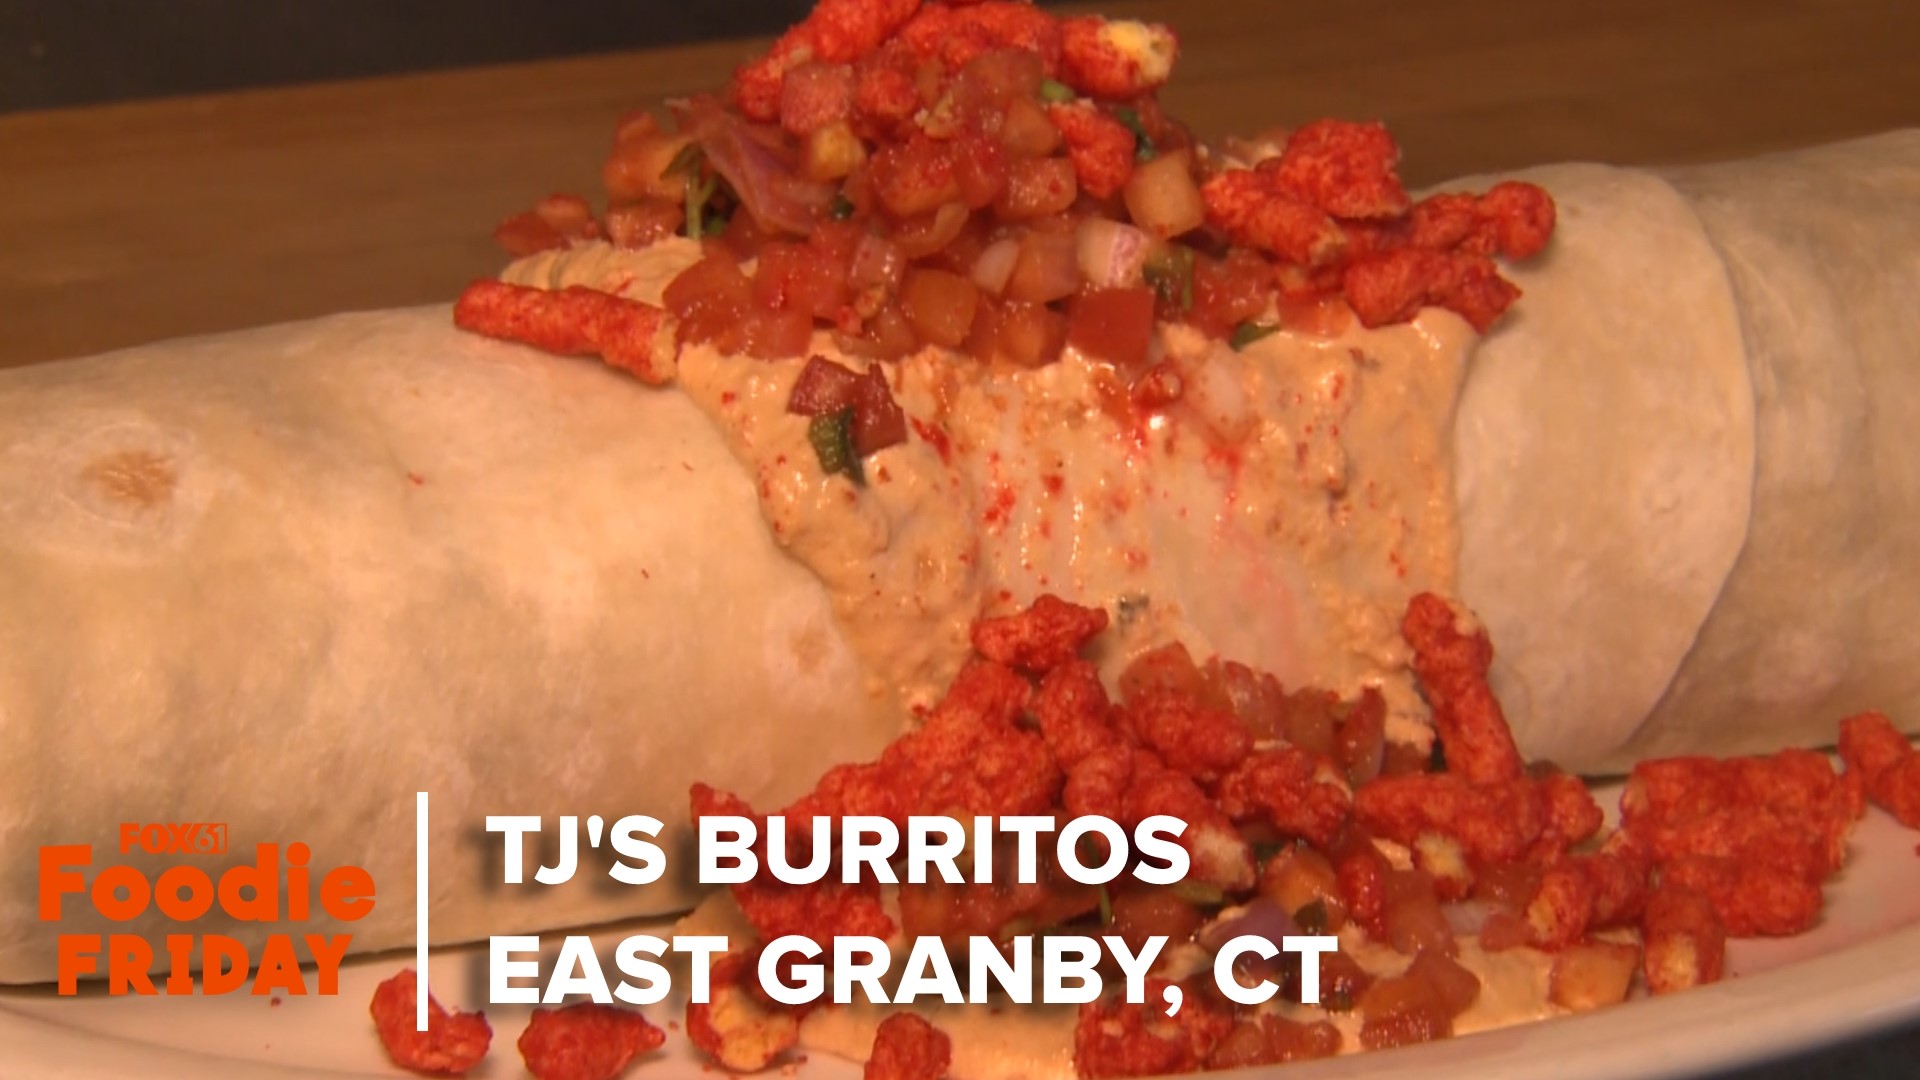 FOX61's Matt Scott visited TJ's Burrito's in East Granby for flights of coffee creations, burgers, breakfast, and of course, burritos.